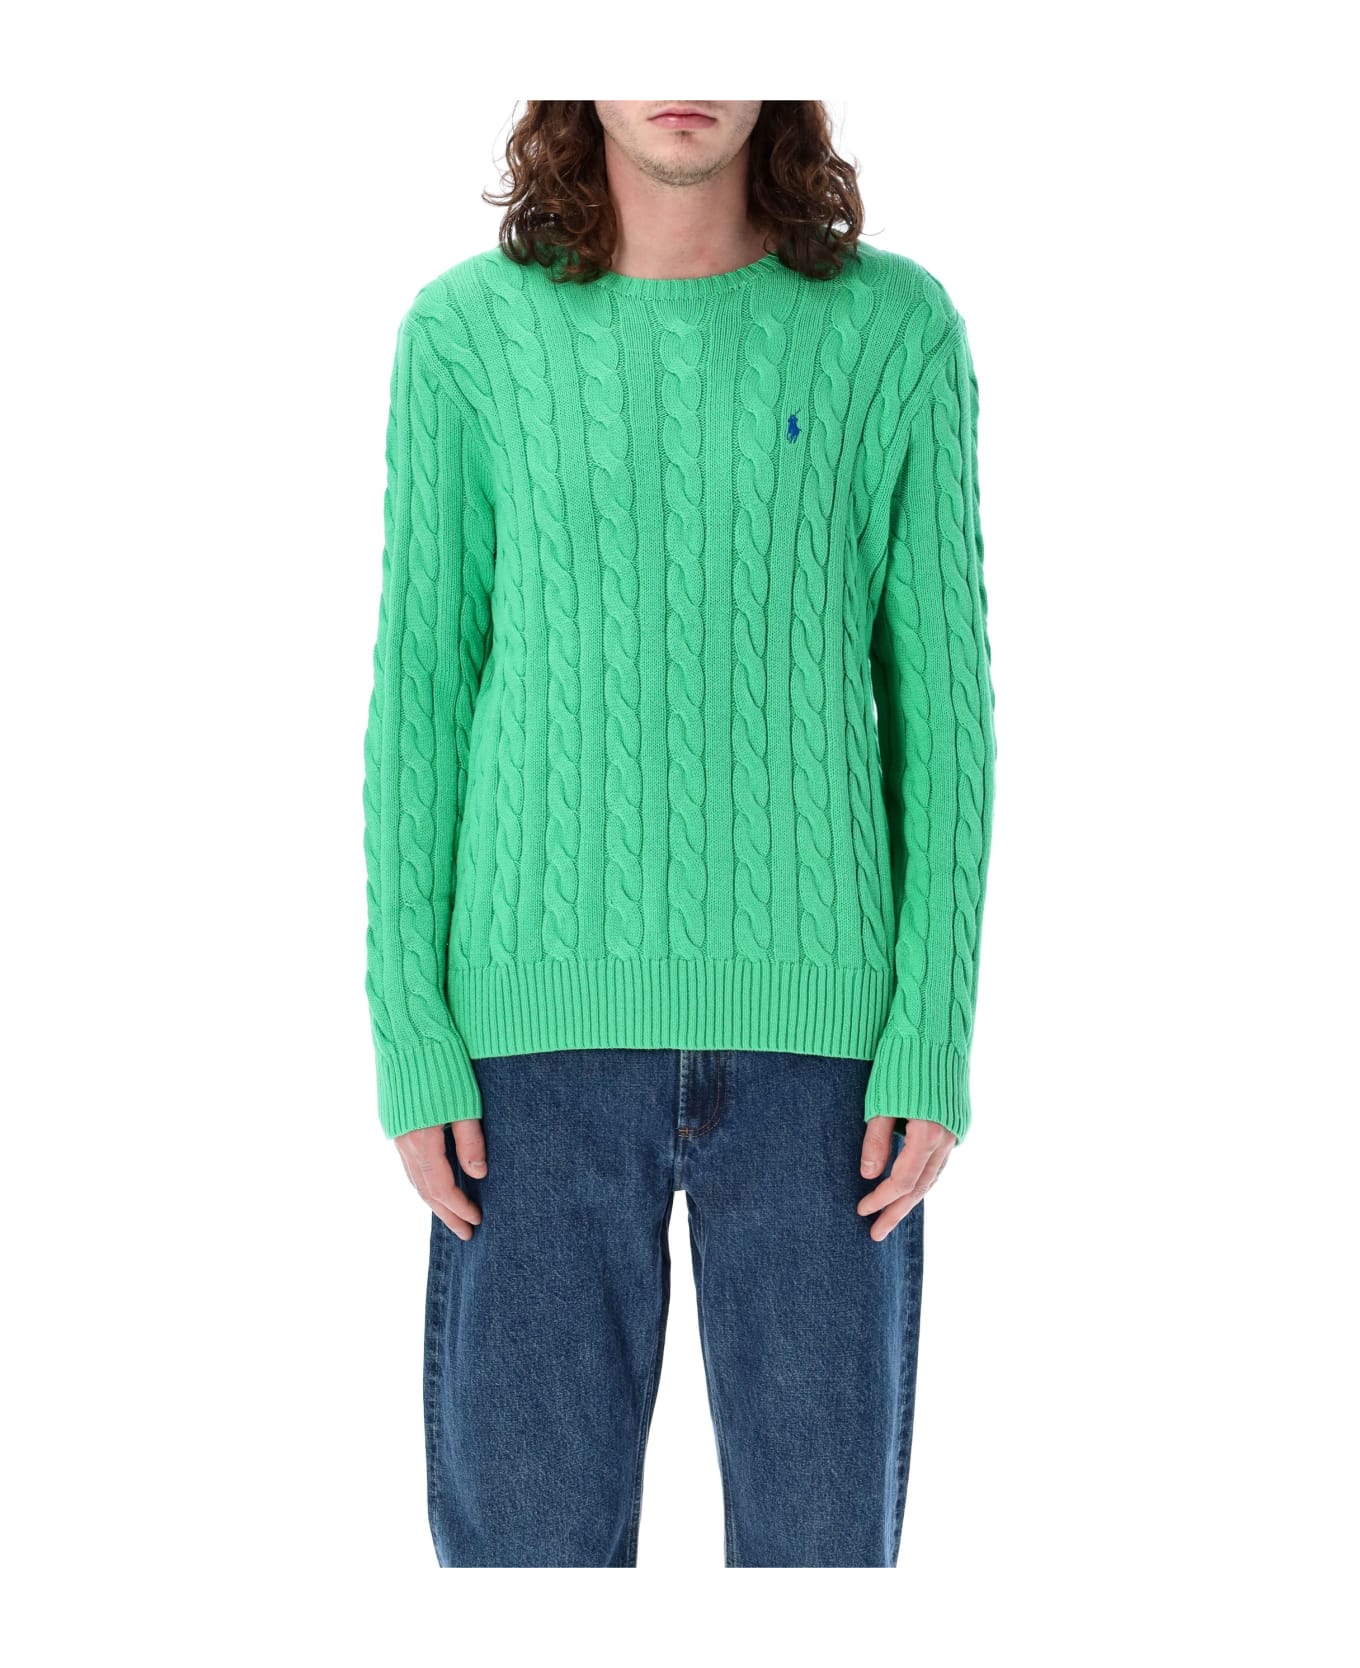 Polo Ralph Lauren Cable Knit Sweater - GREEN